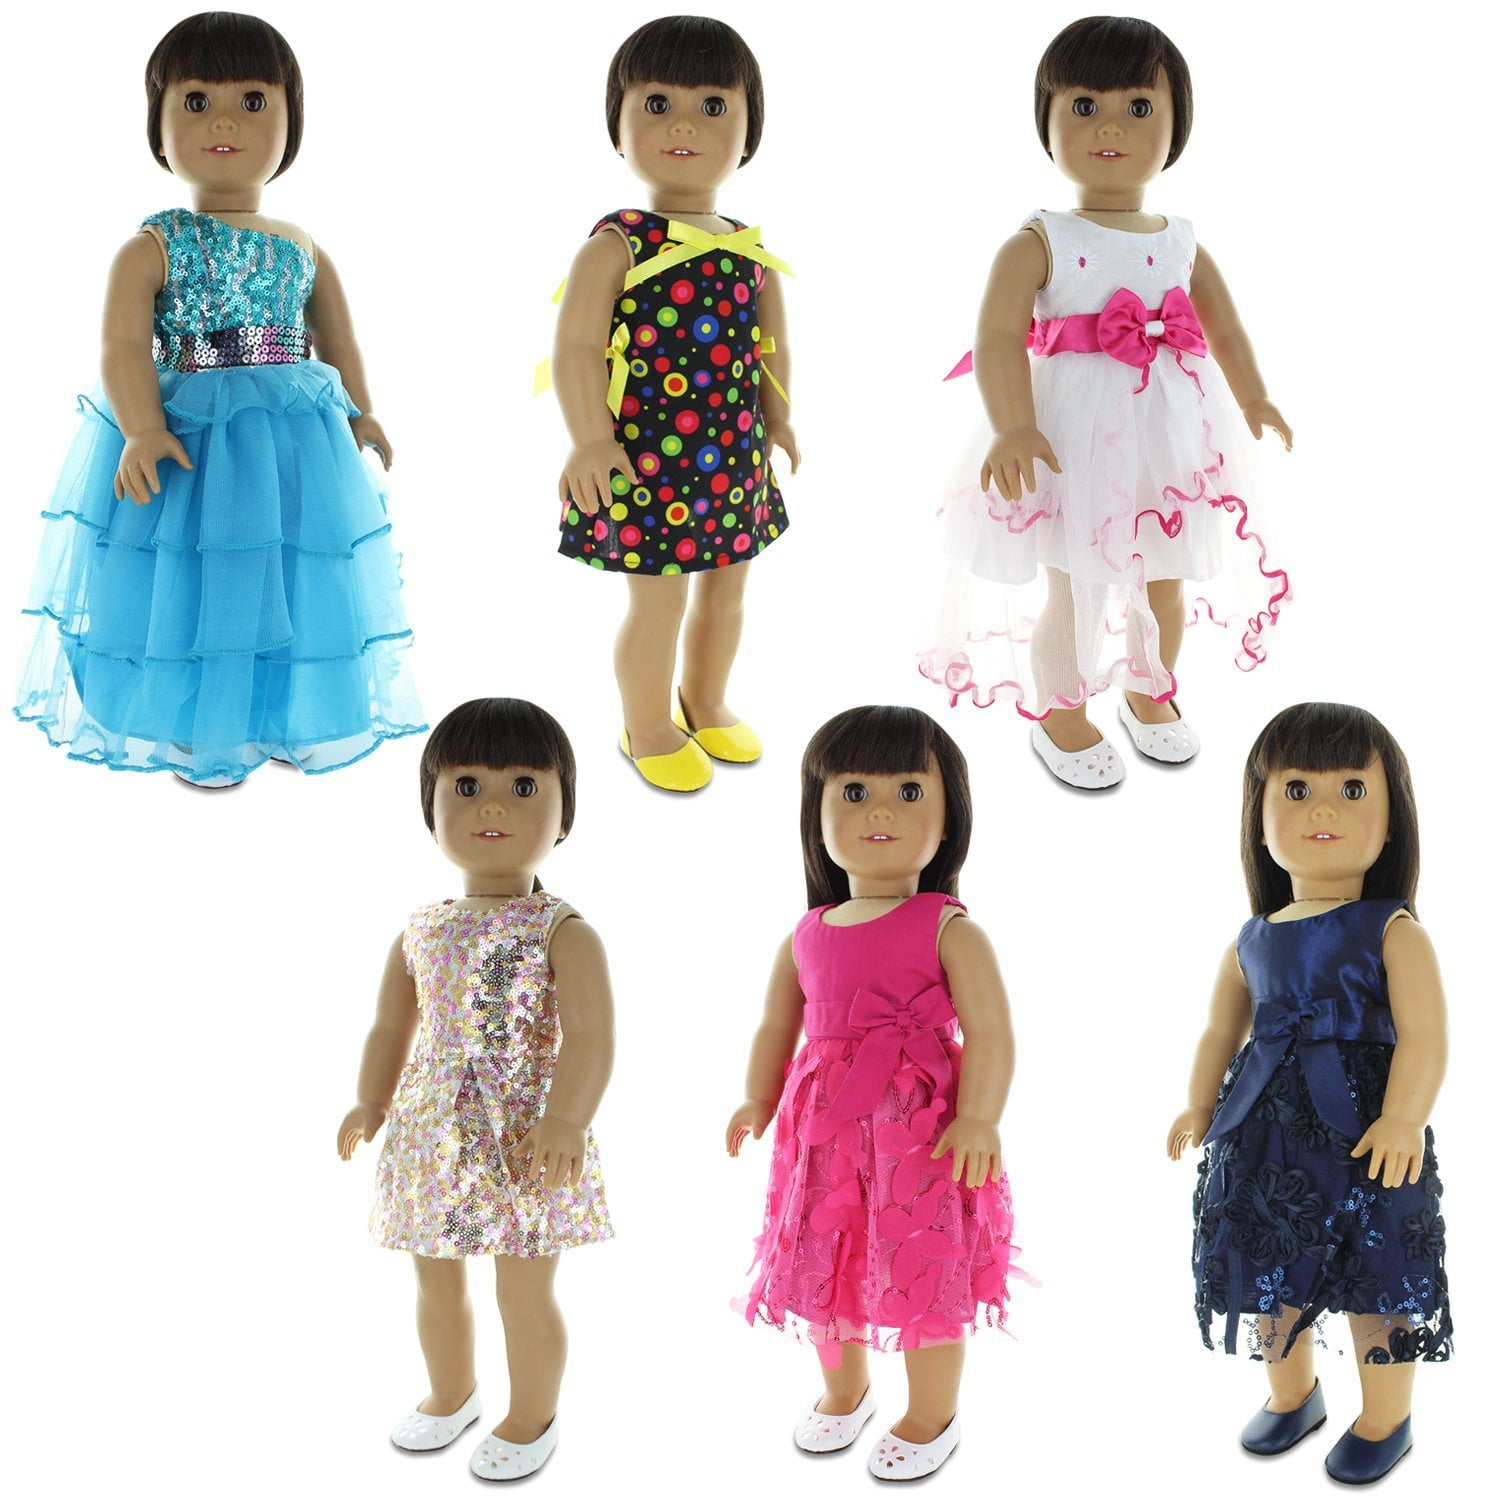 AMERICAN GIRL 18 INCH DOLL DRESS & CARDIGAN CLOTHES SET FOR OUR GENERATION 